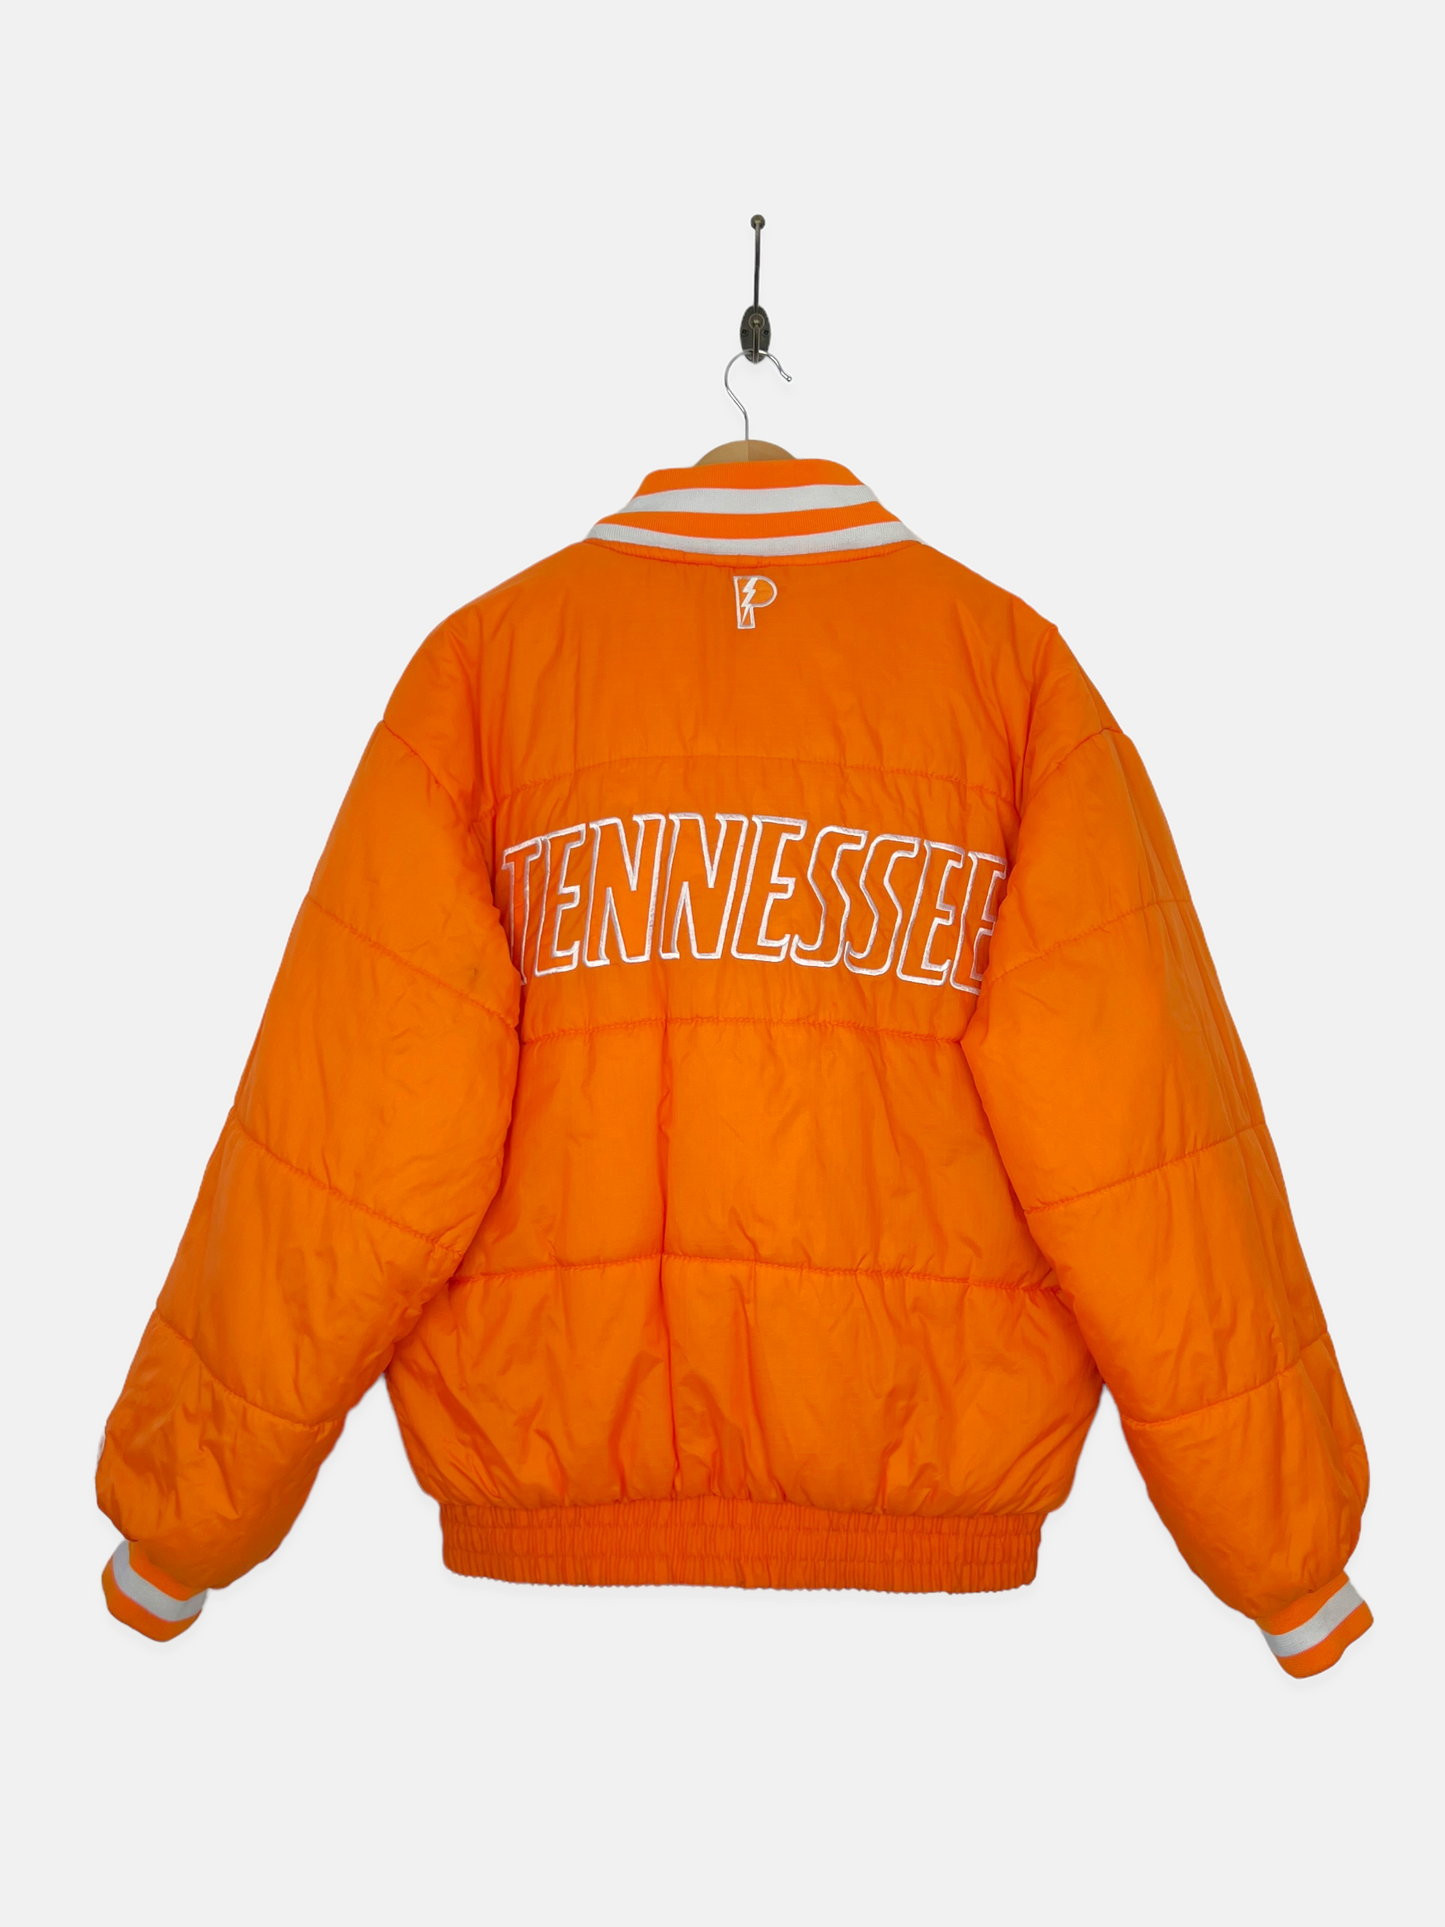 90's Tennessee University Embroidered Reversible Puffer Jacket with Hood Size M-L